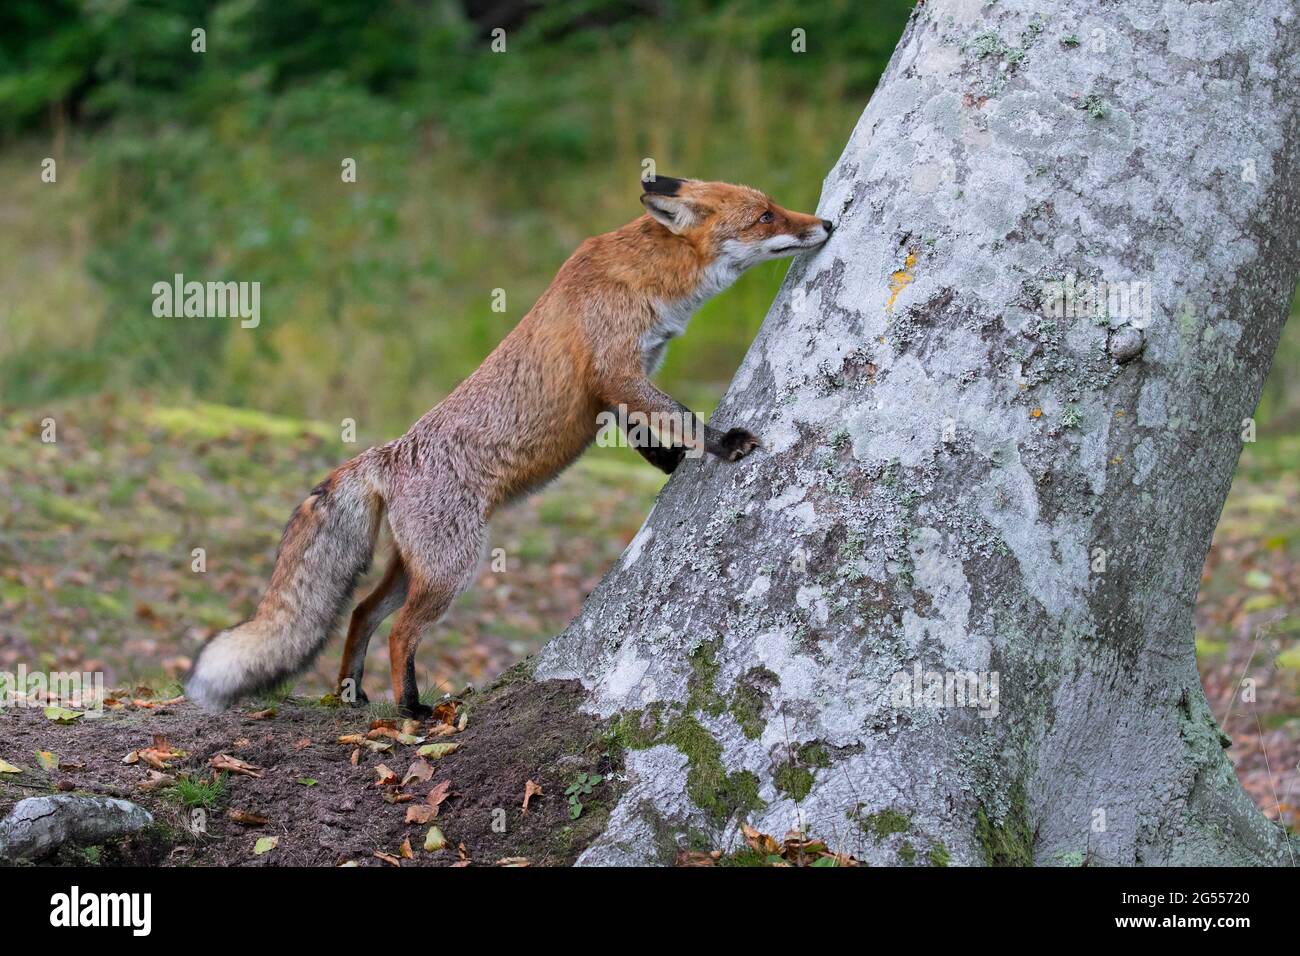 Red fox (Vulpes vulpes) sniffing at animal's scent mark on tree in forest in autumn Stock Photo